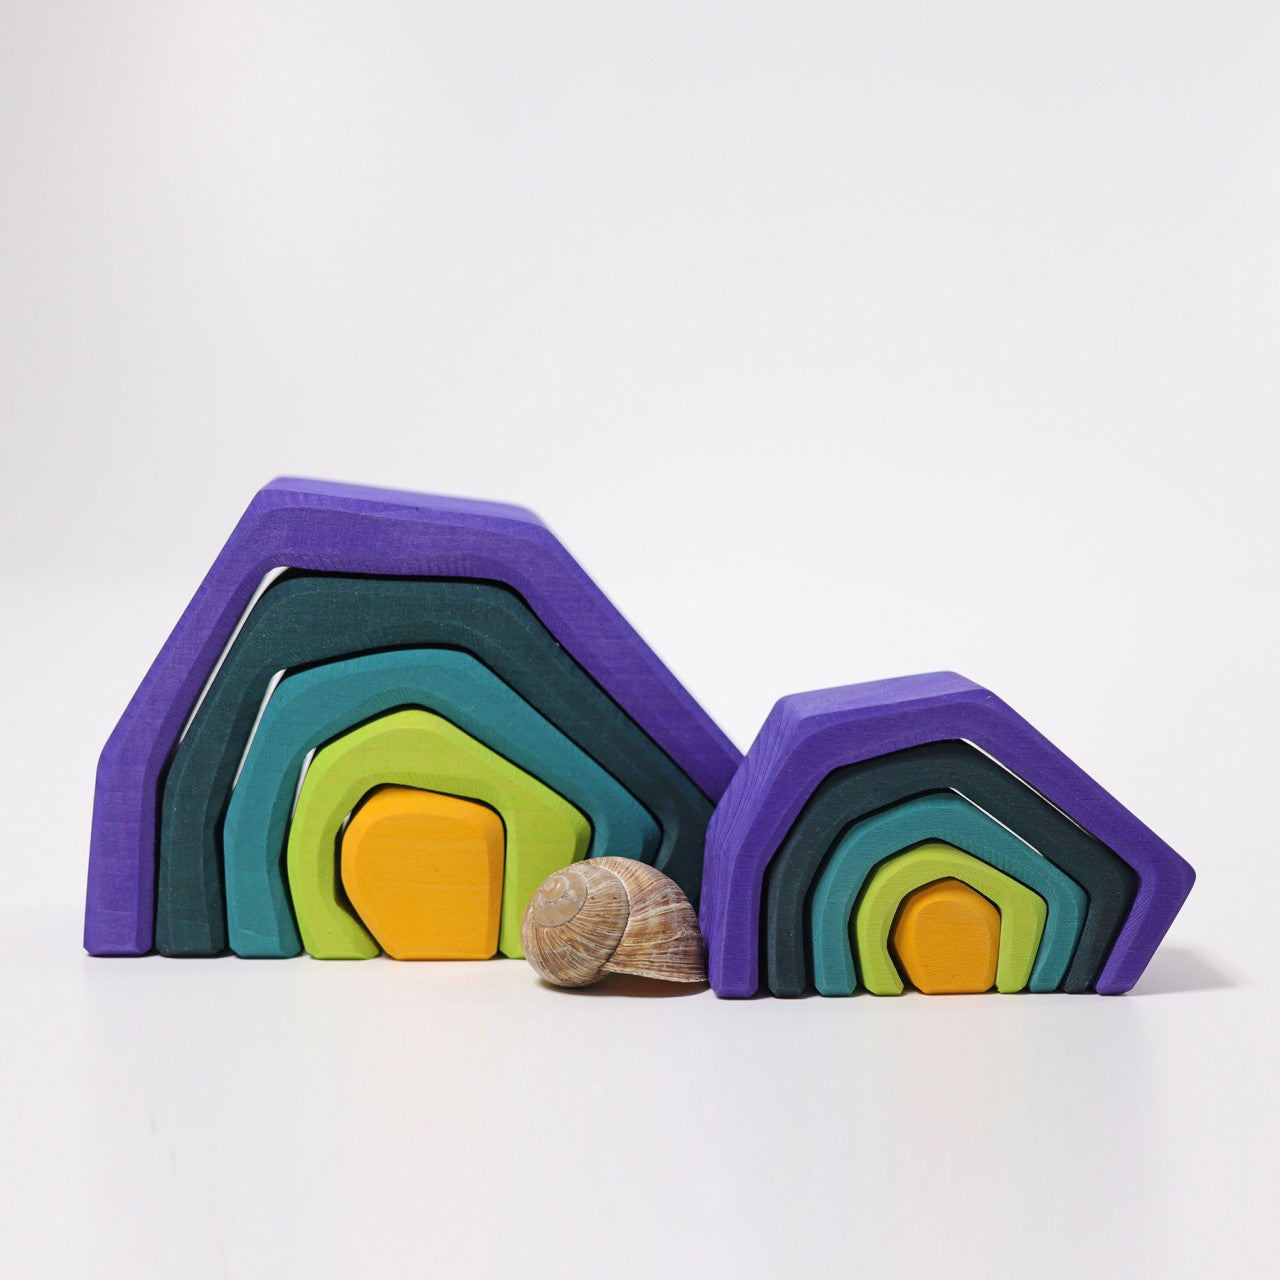 Wooden "Earth" stacking blocks by Grimms.